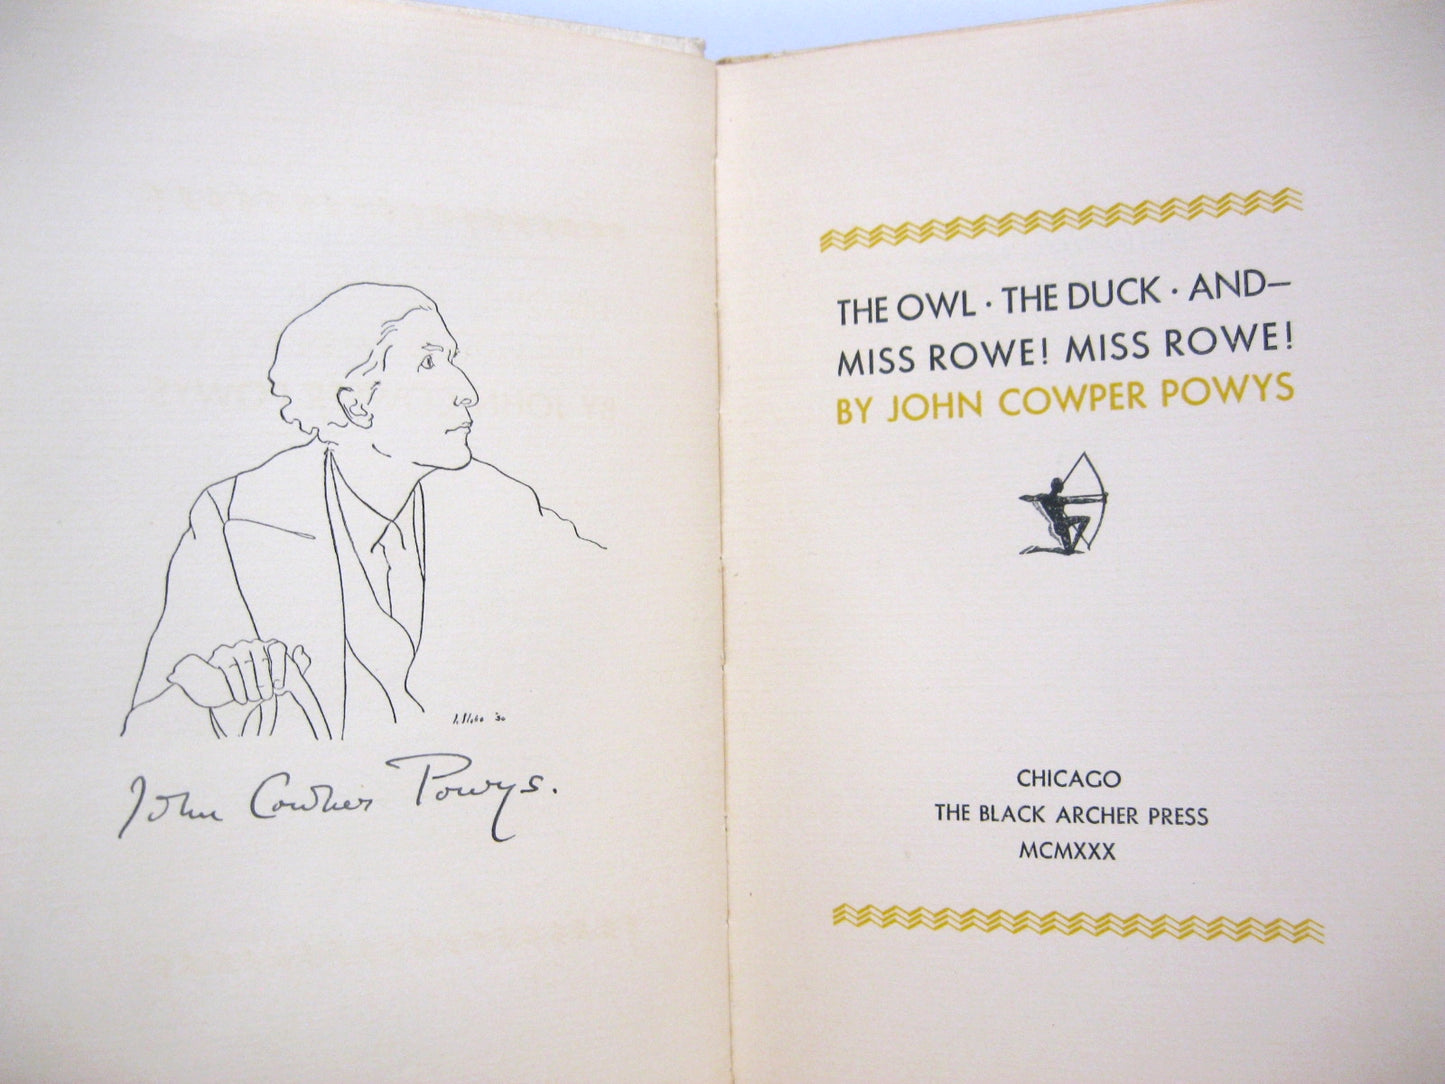 The Owl, the Duck, and--Miss Rowe! Miss Rowe! by John Cowper Powys